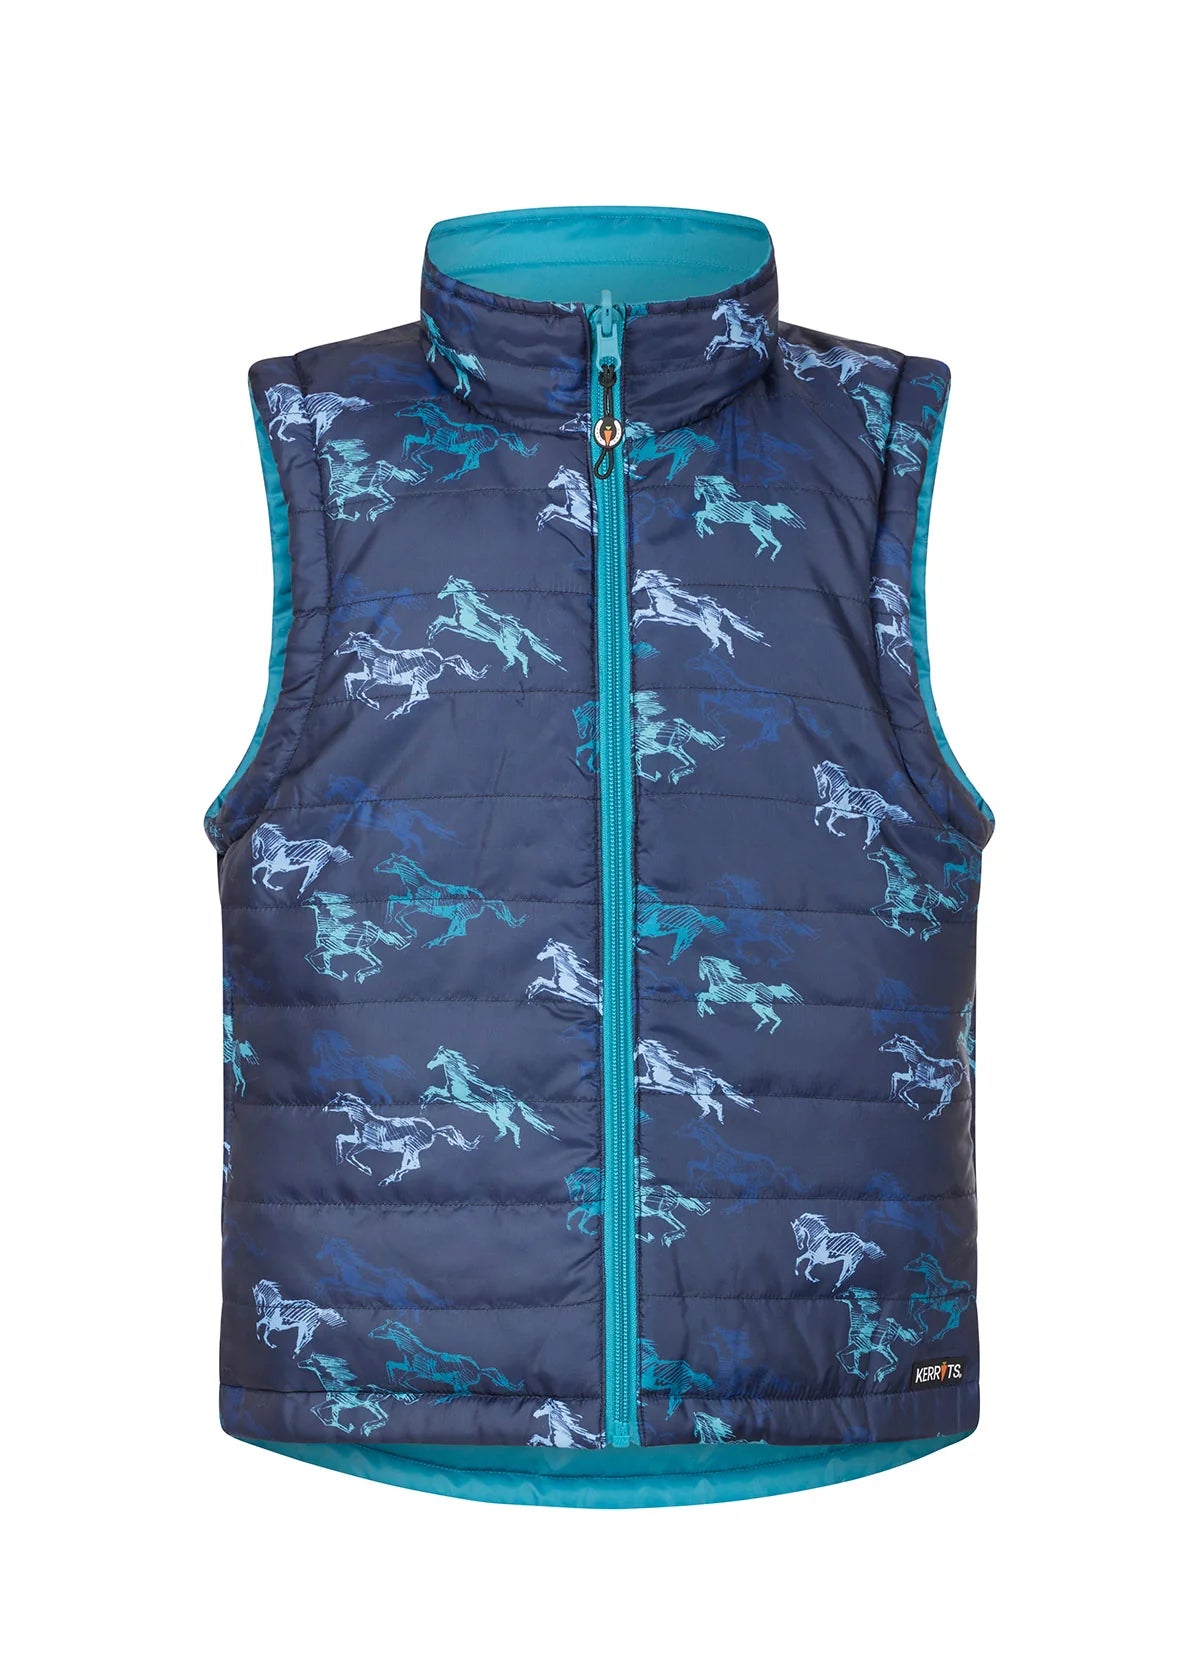 Kerrits Kids Pony Tracks Reversible Quilted Riding Vest - CLEARANCE